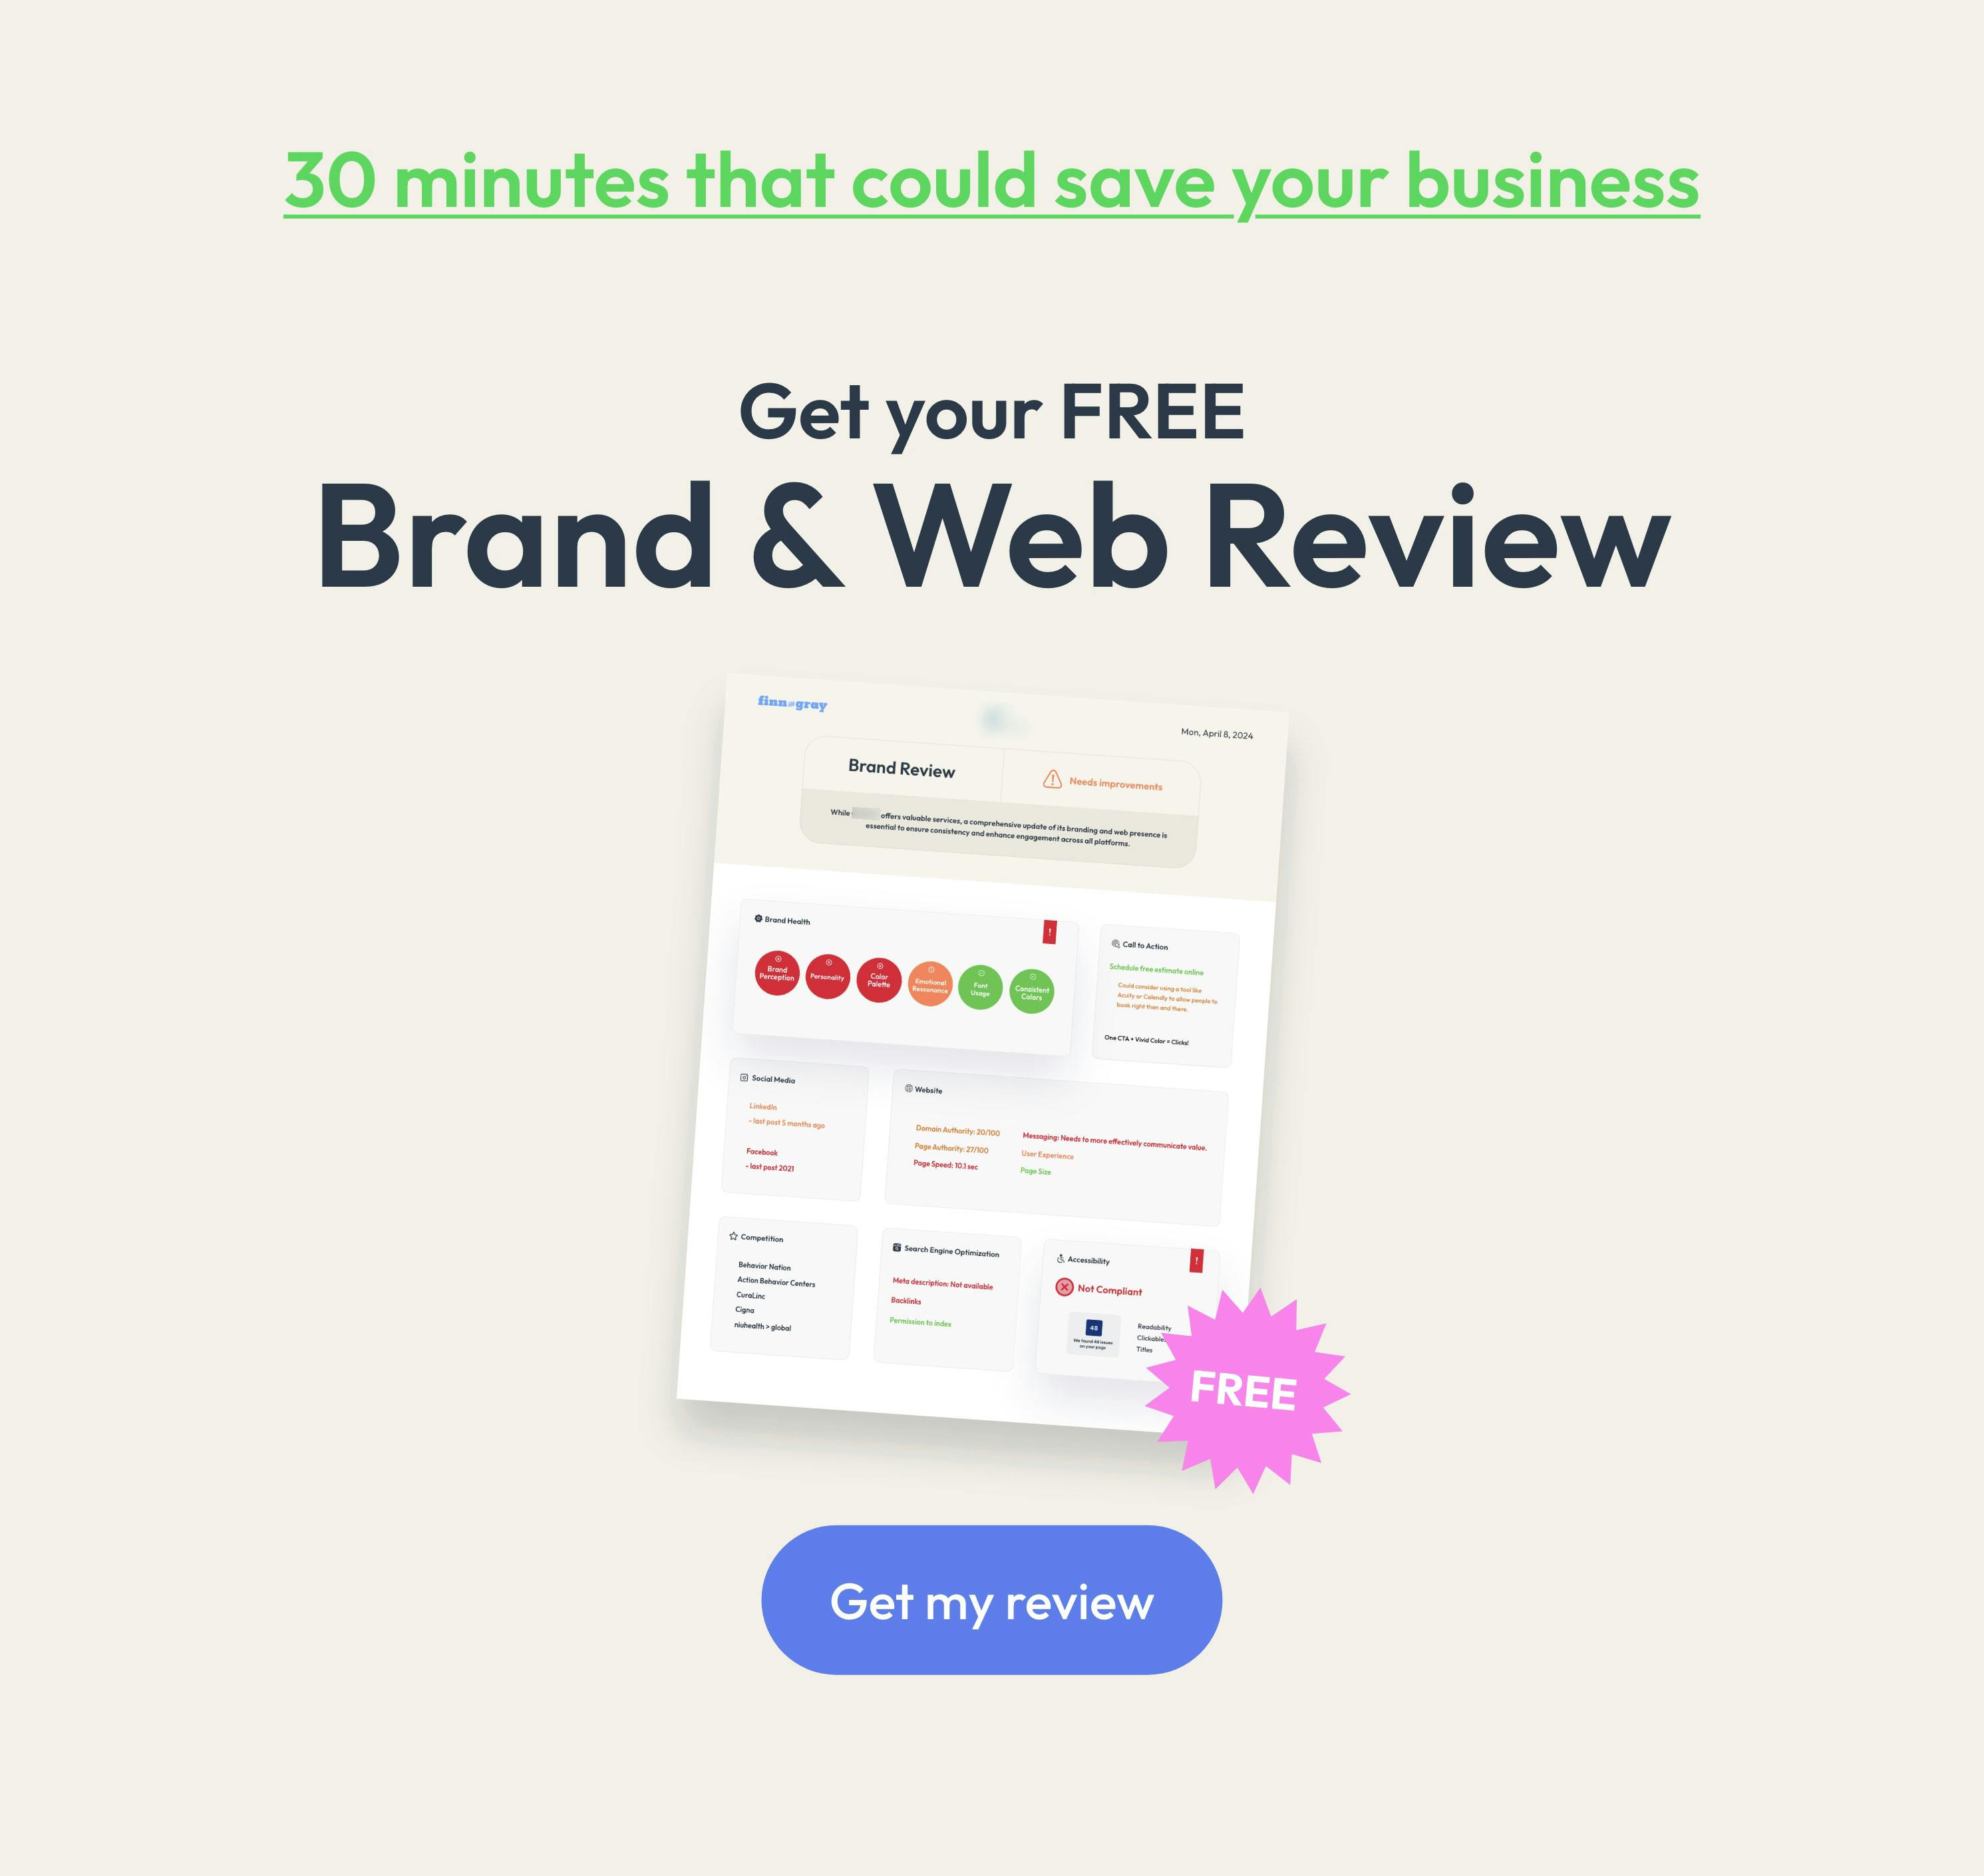 Get a free brand and web review for your business today